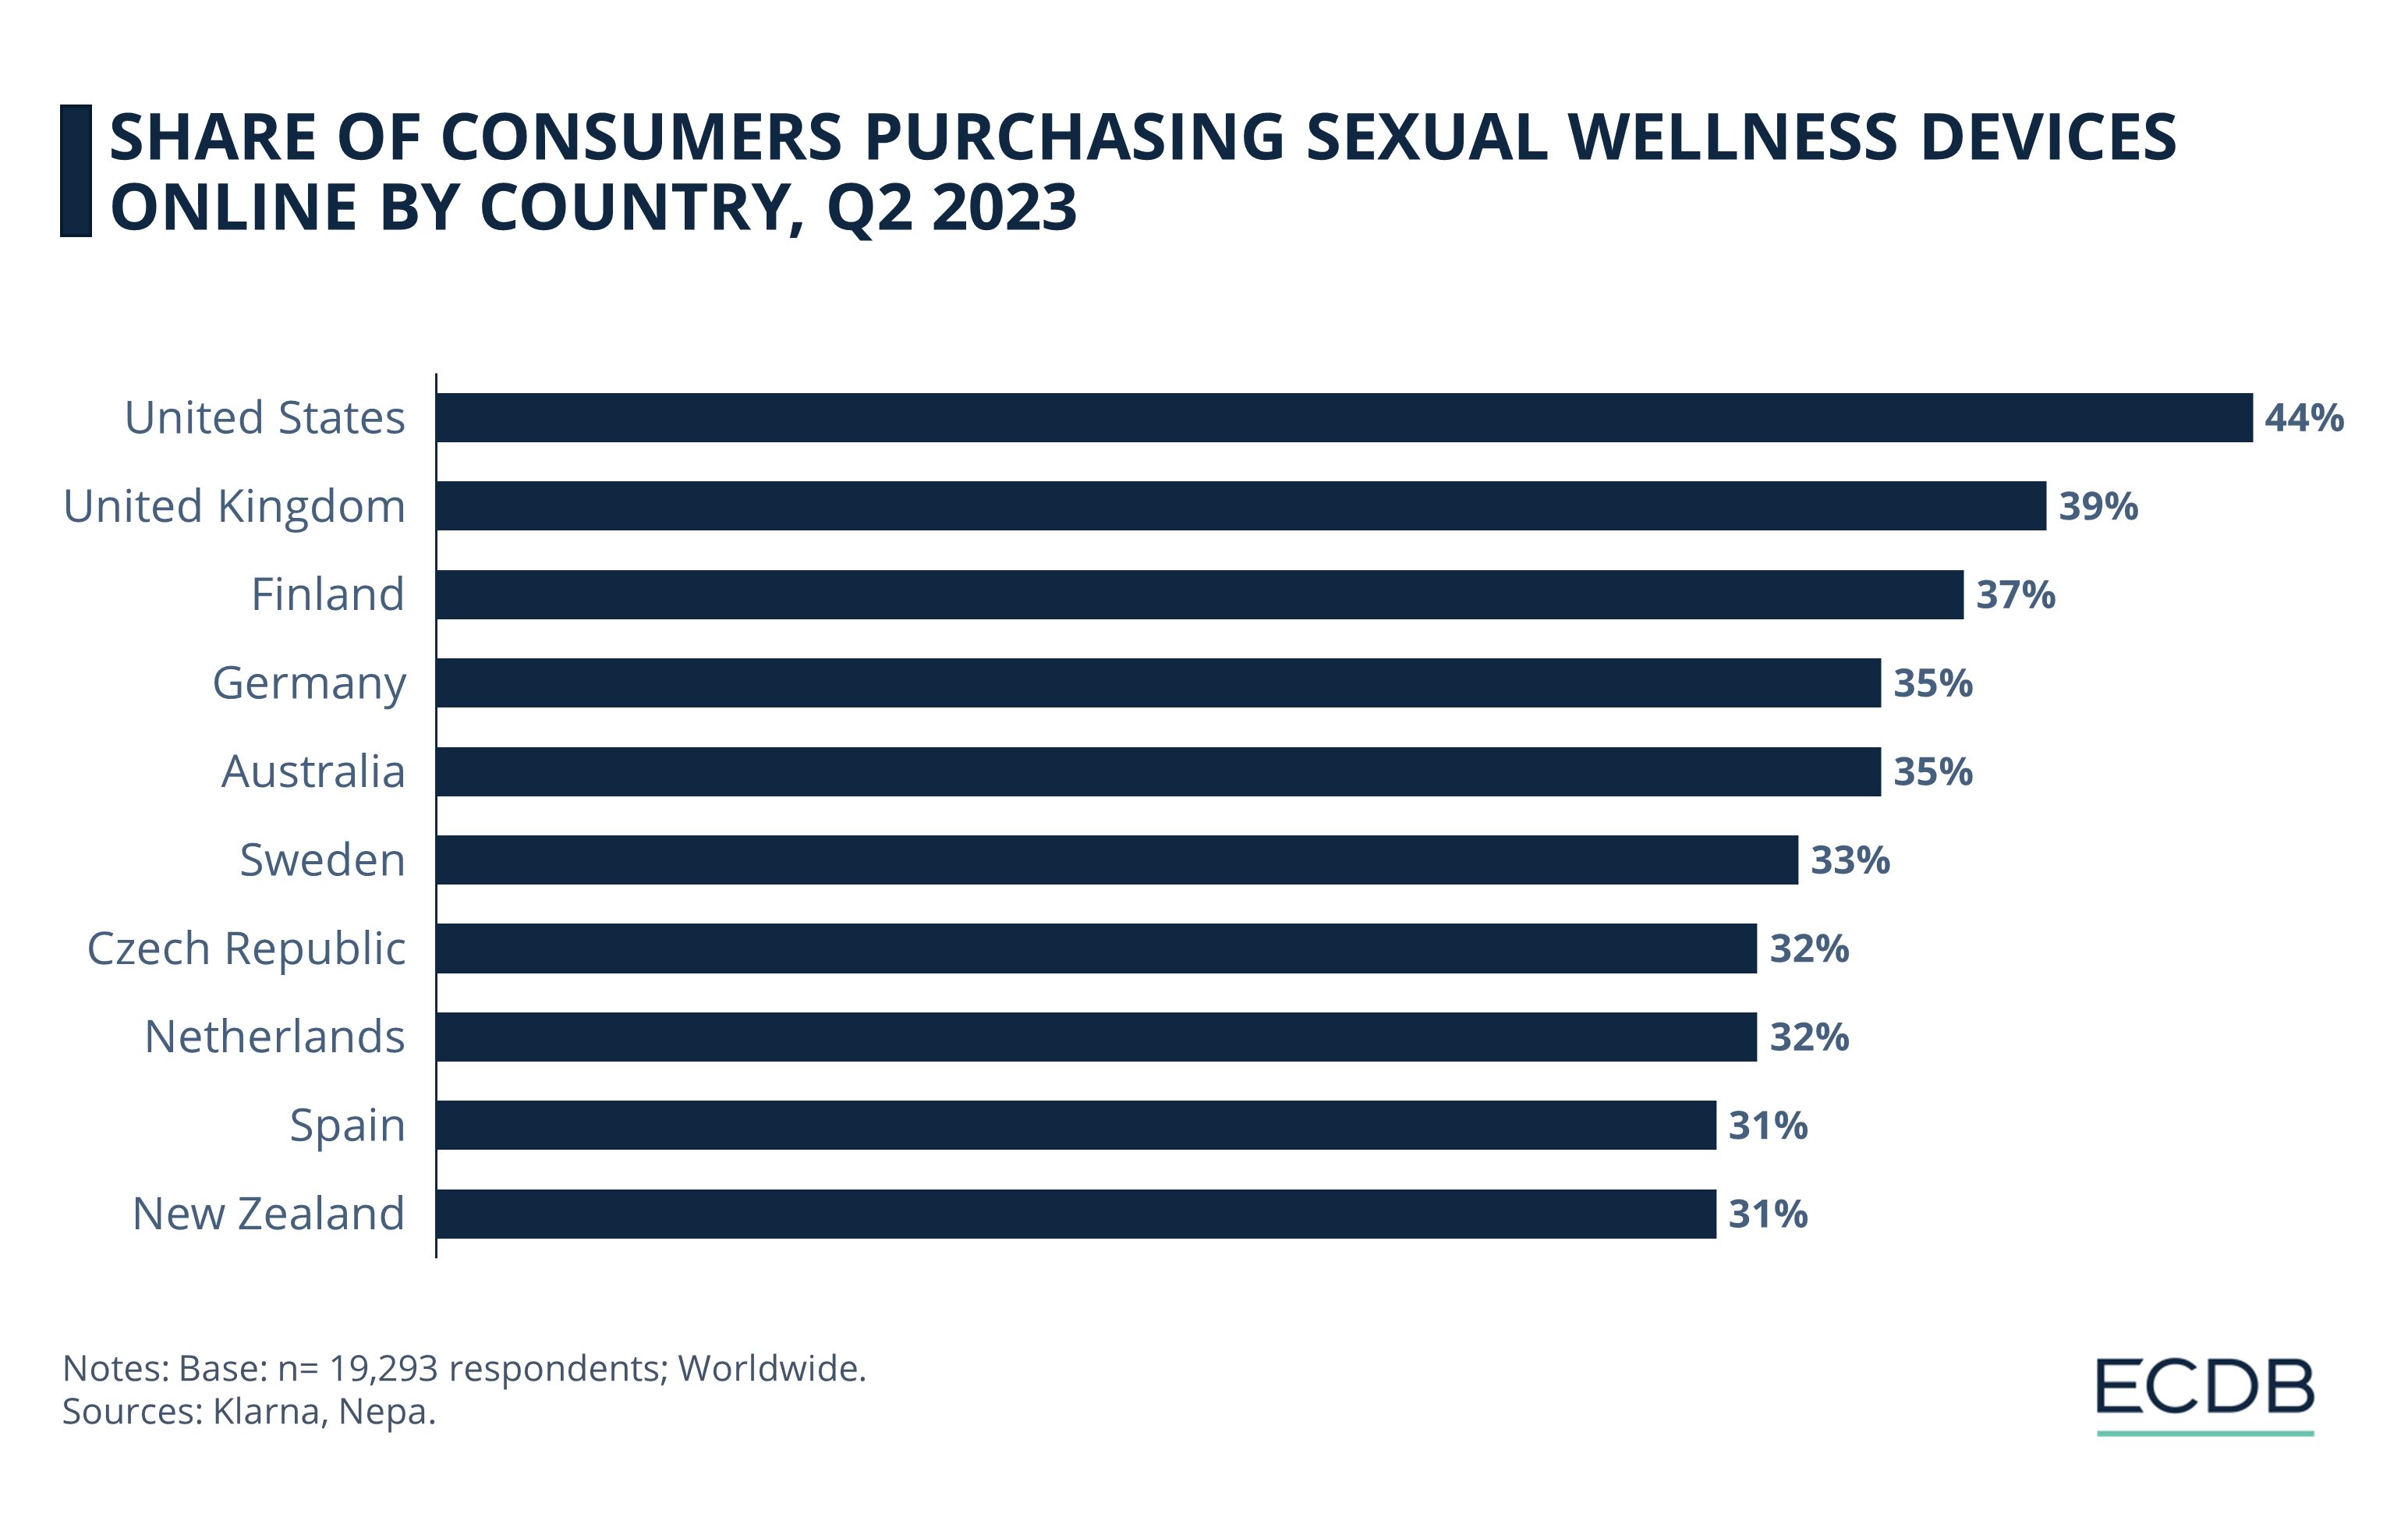 Share of Consumers Purchasing Sexual Wellness Devices Online by Country, Q2 2023